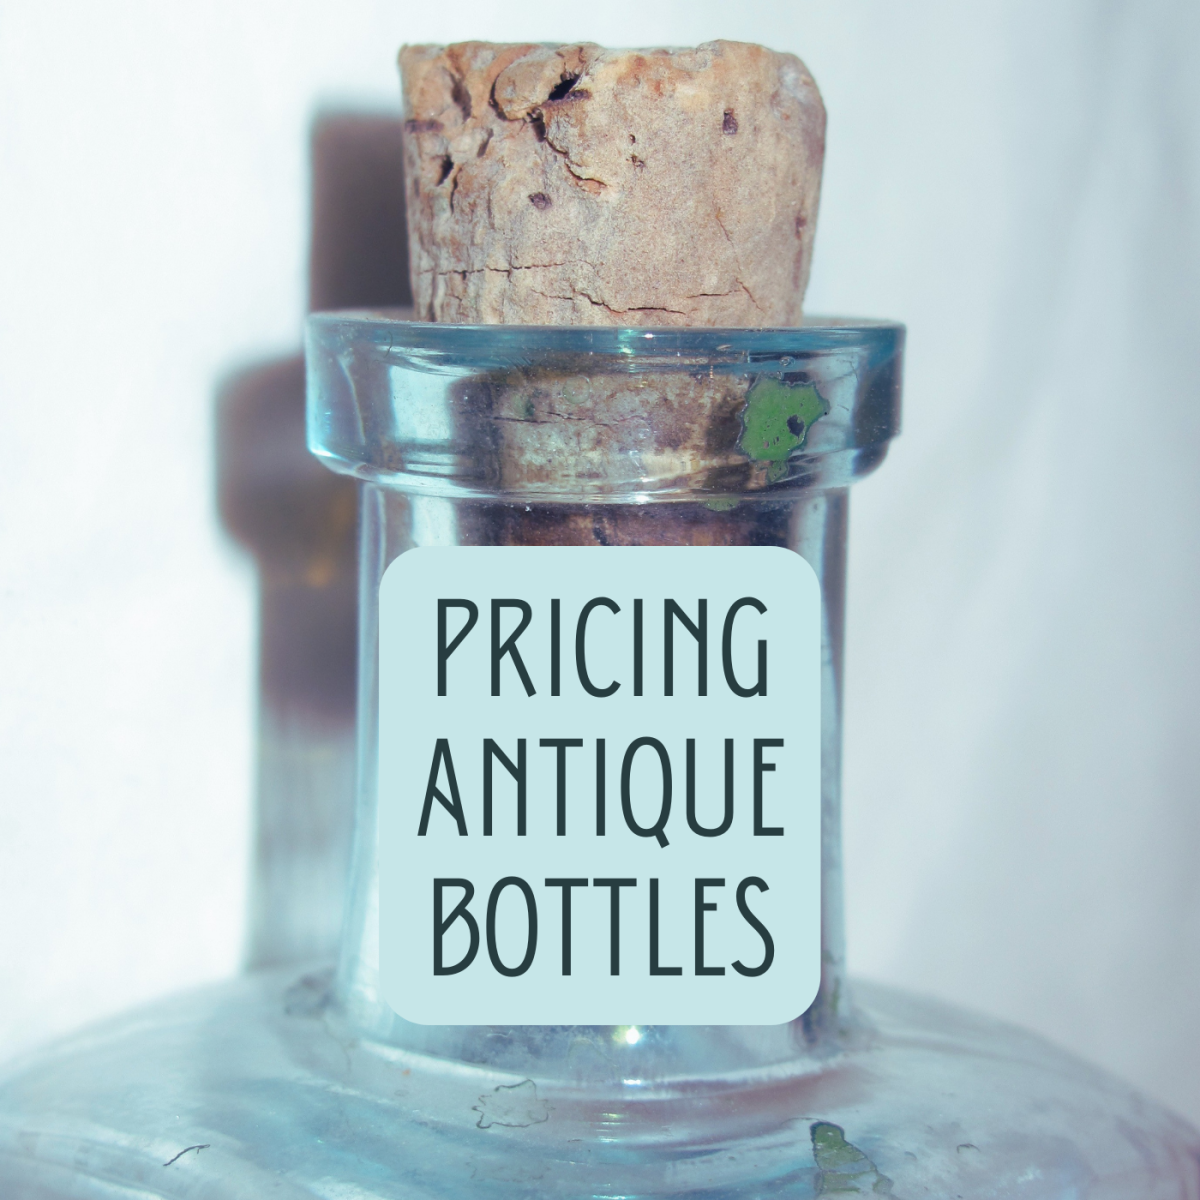 Old cork-top bottles can be truly beautiful, but how do you know if they're worth anything? Learn about the factors that affect the bottle's price and how to estimate its value.